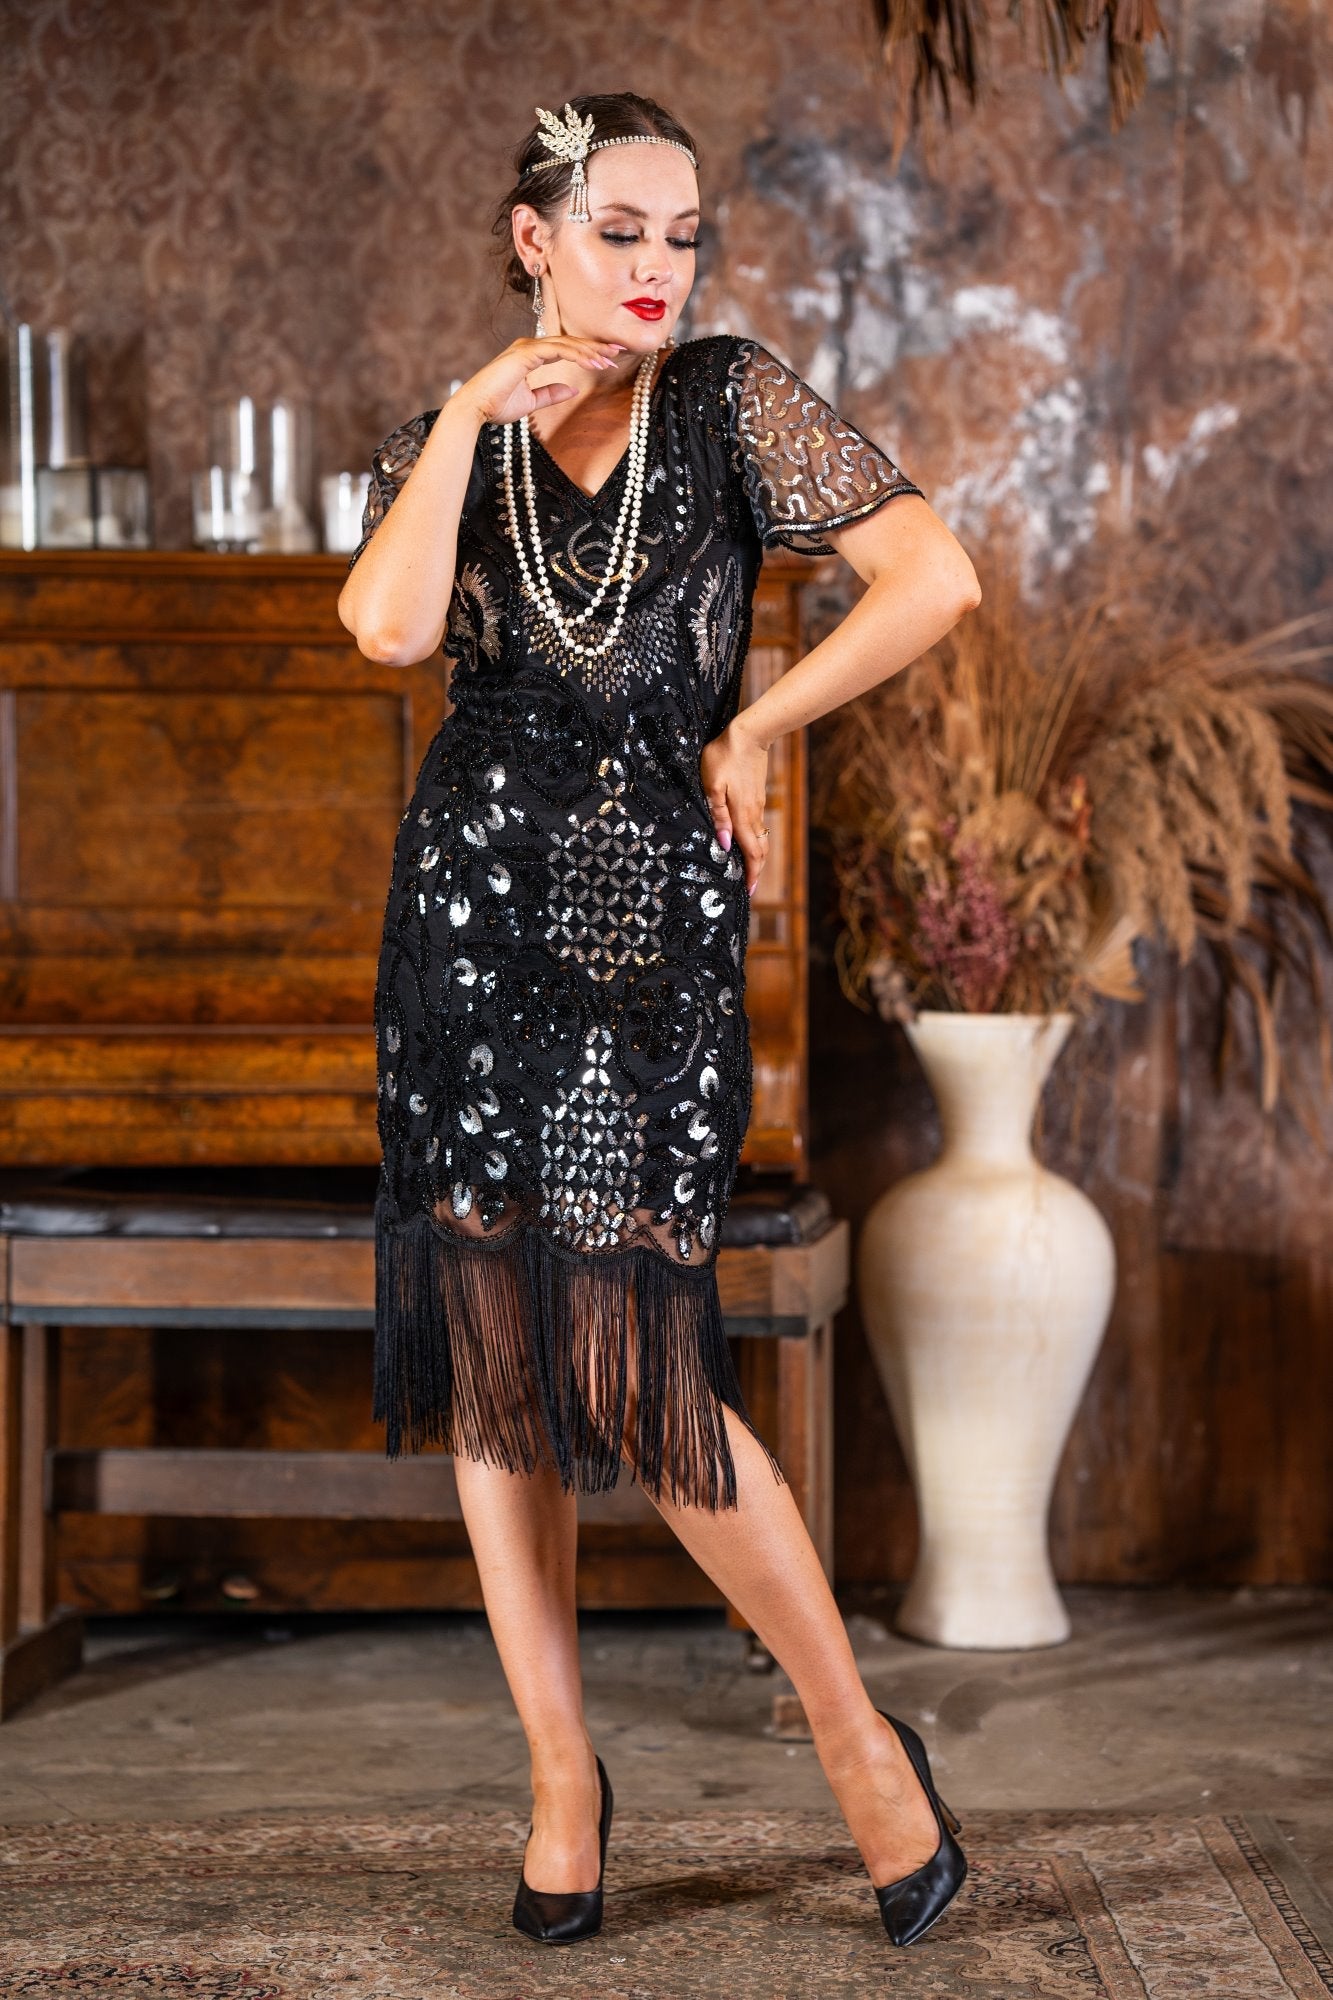 A 1920s Black & Silver Sequin Gatsby Dress with SleevesA 1920s Black & Silver Sequin Gatsby Dress with Sleeves